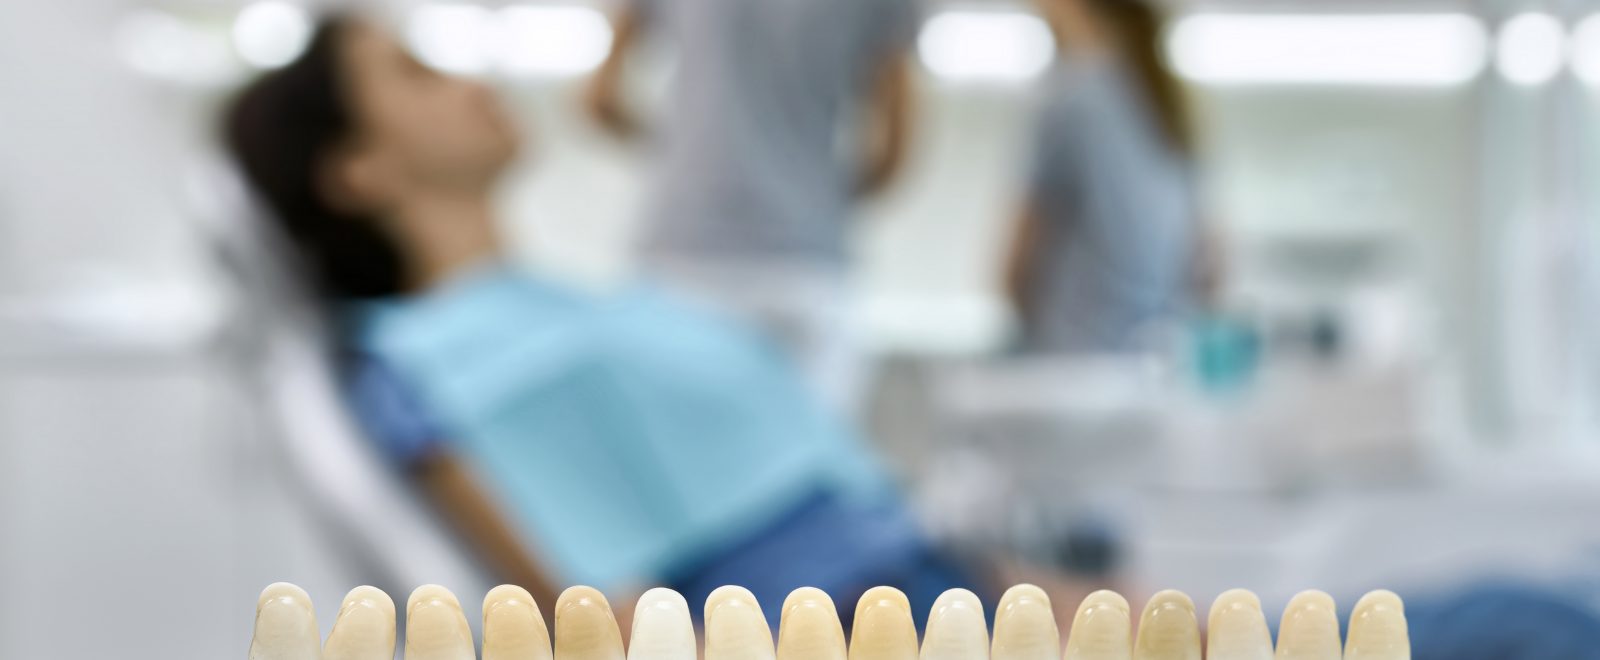 Teeth shade guide on the blurred background of a dental cabinet with patient and dentists